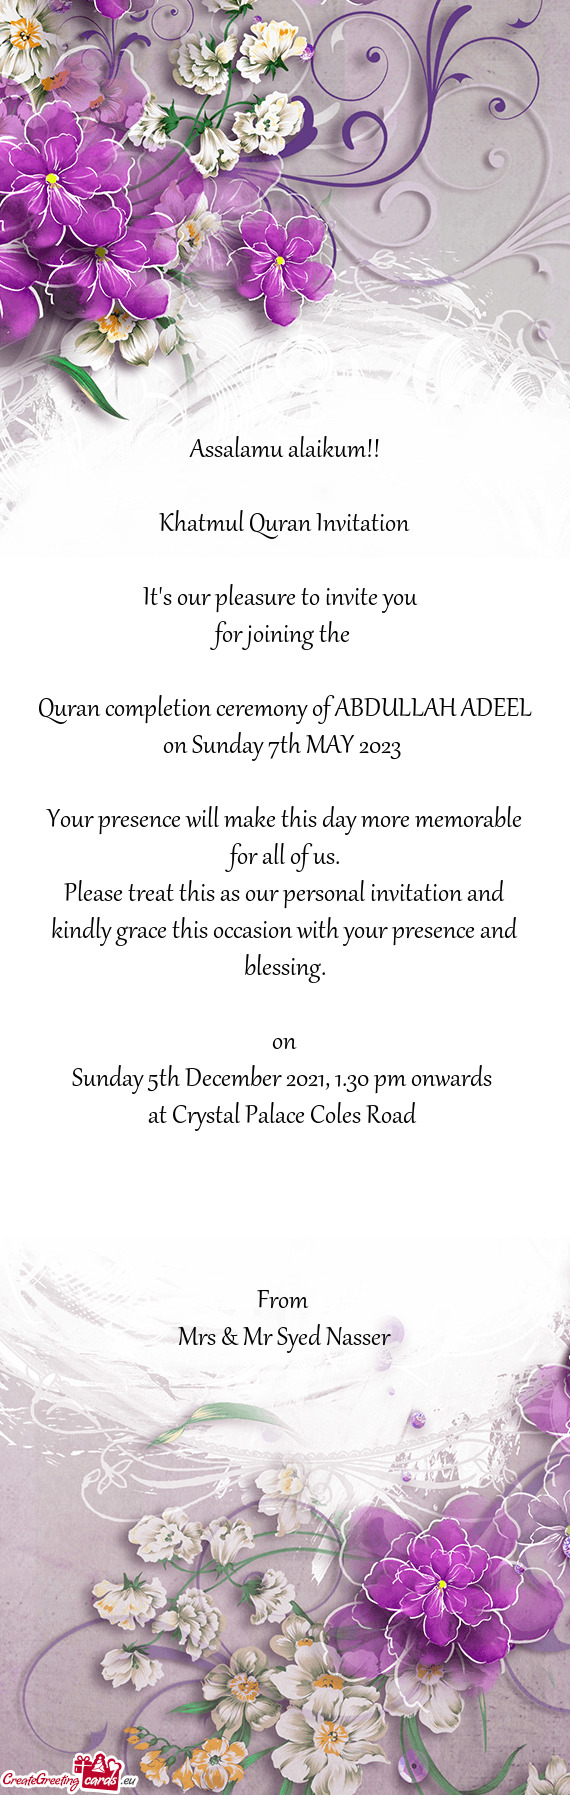 Quran completion ceremony of ABDULLAH ADEEL on Sunday 7th MAY 2023